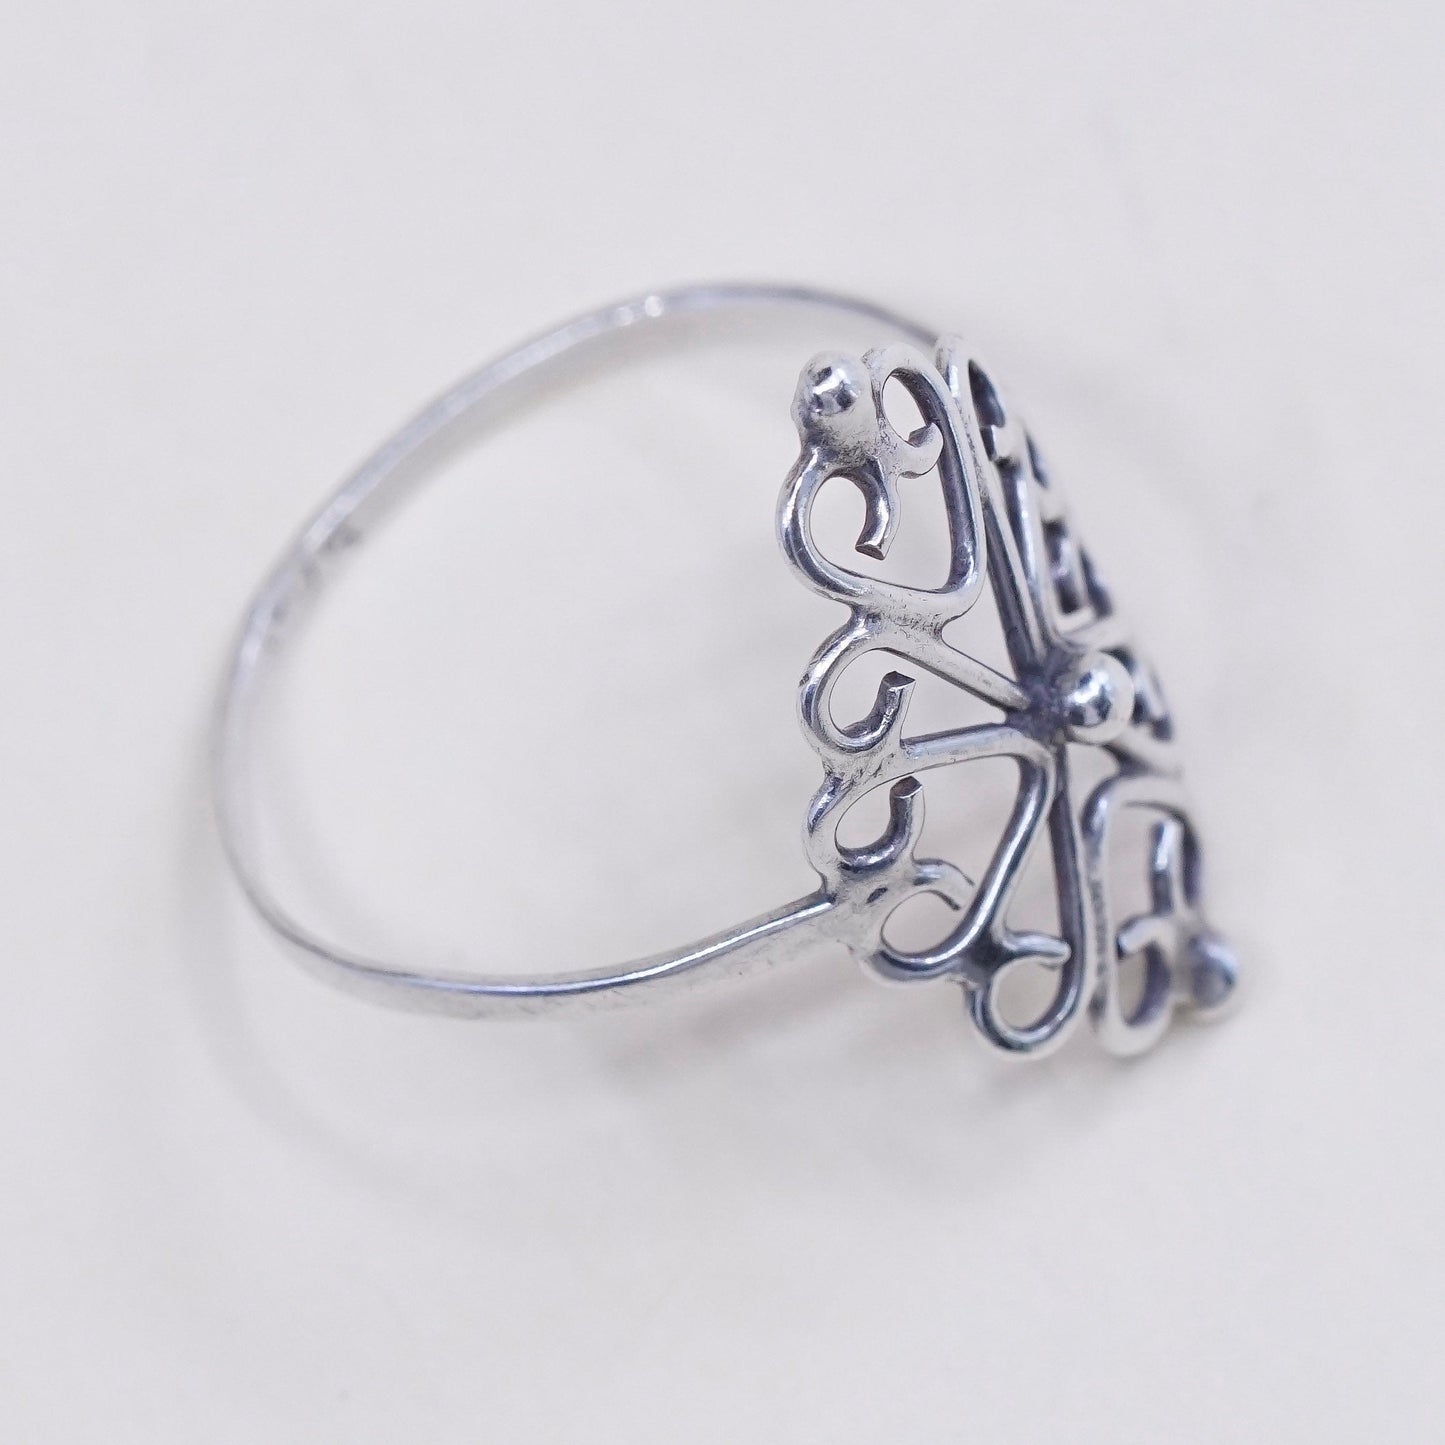 Size 9.25, Vintage sterling silver handmade wired ring, 925 filigree band